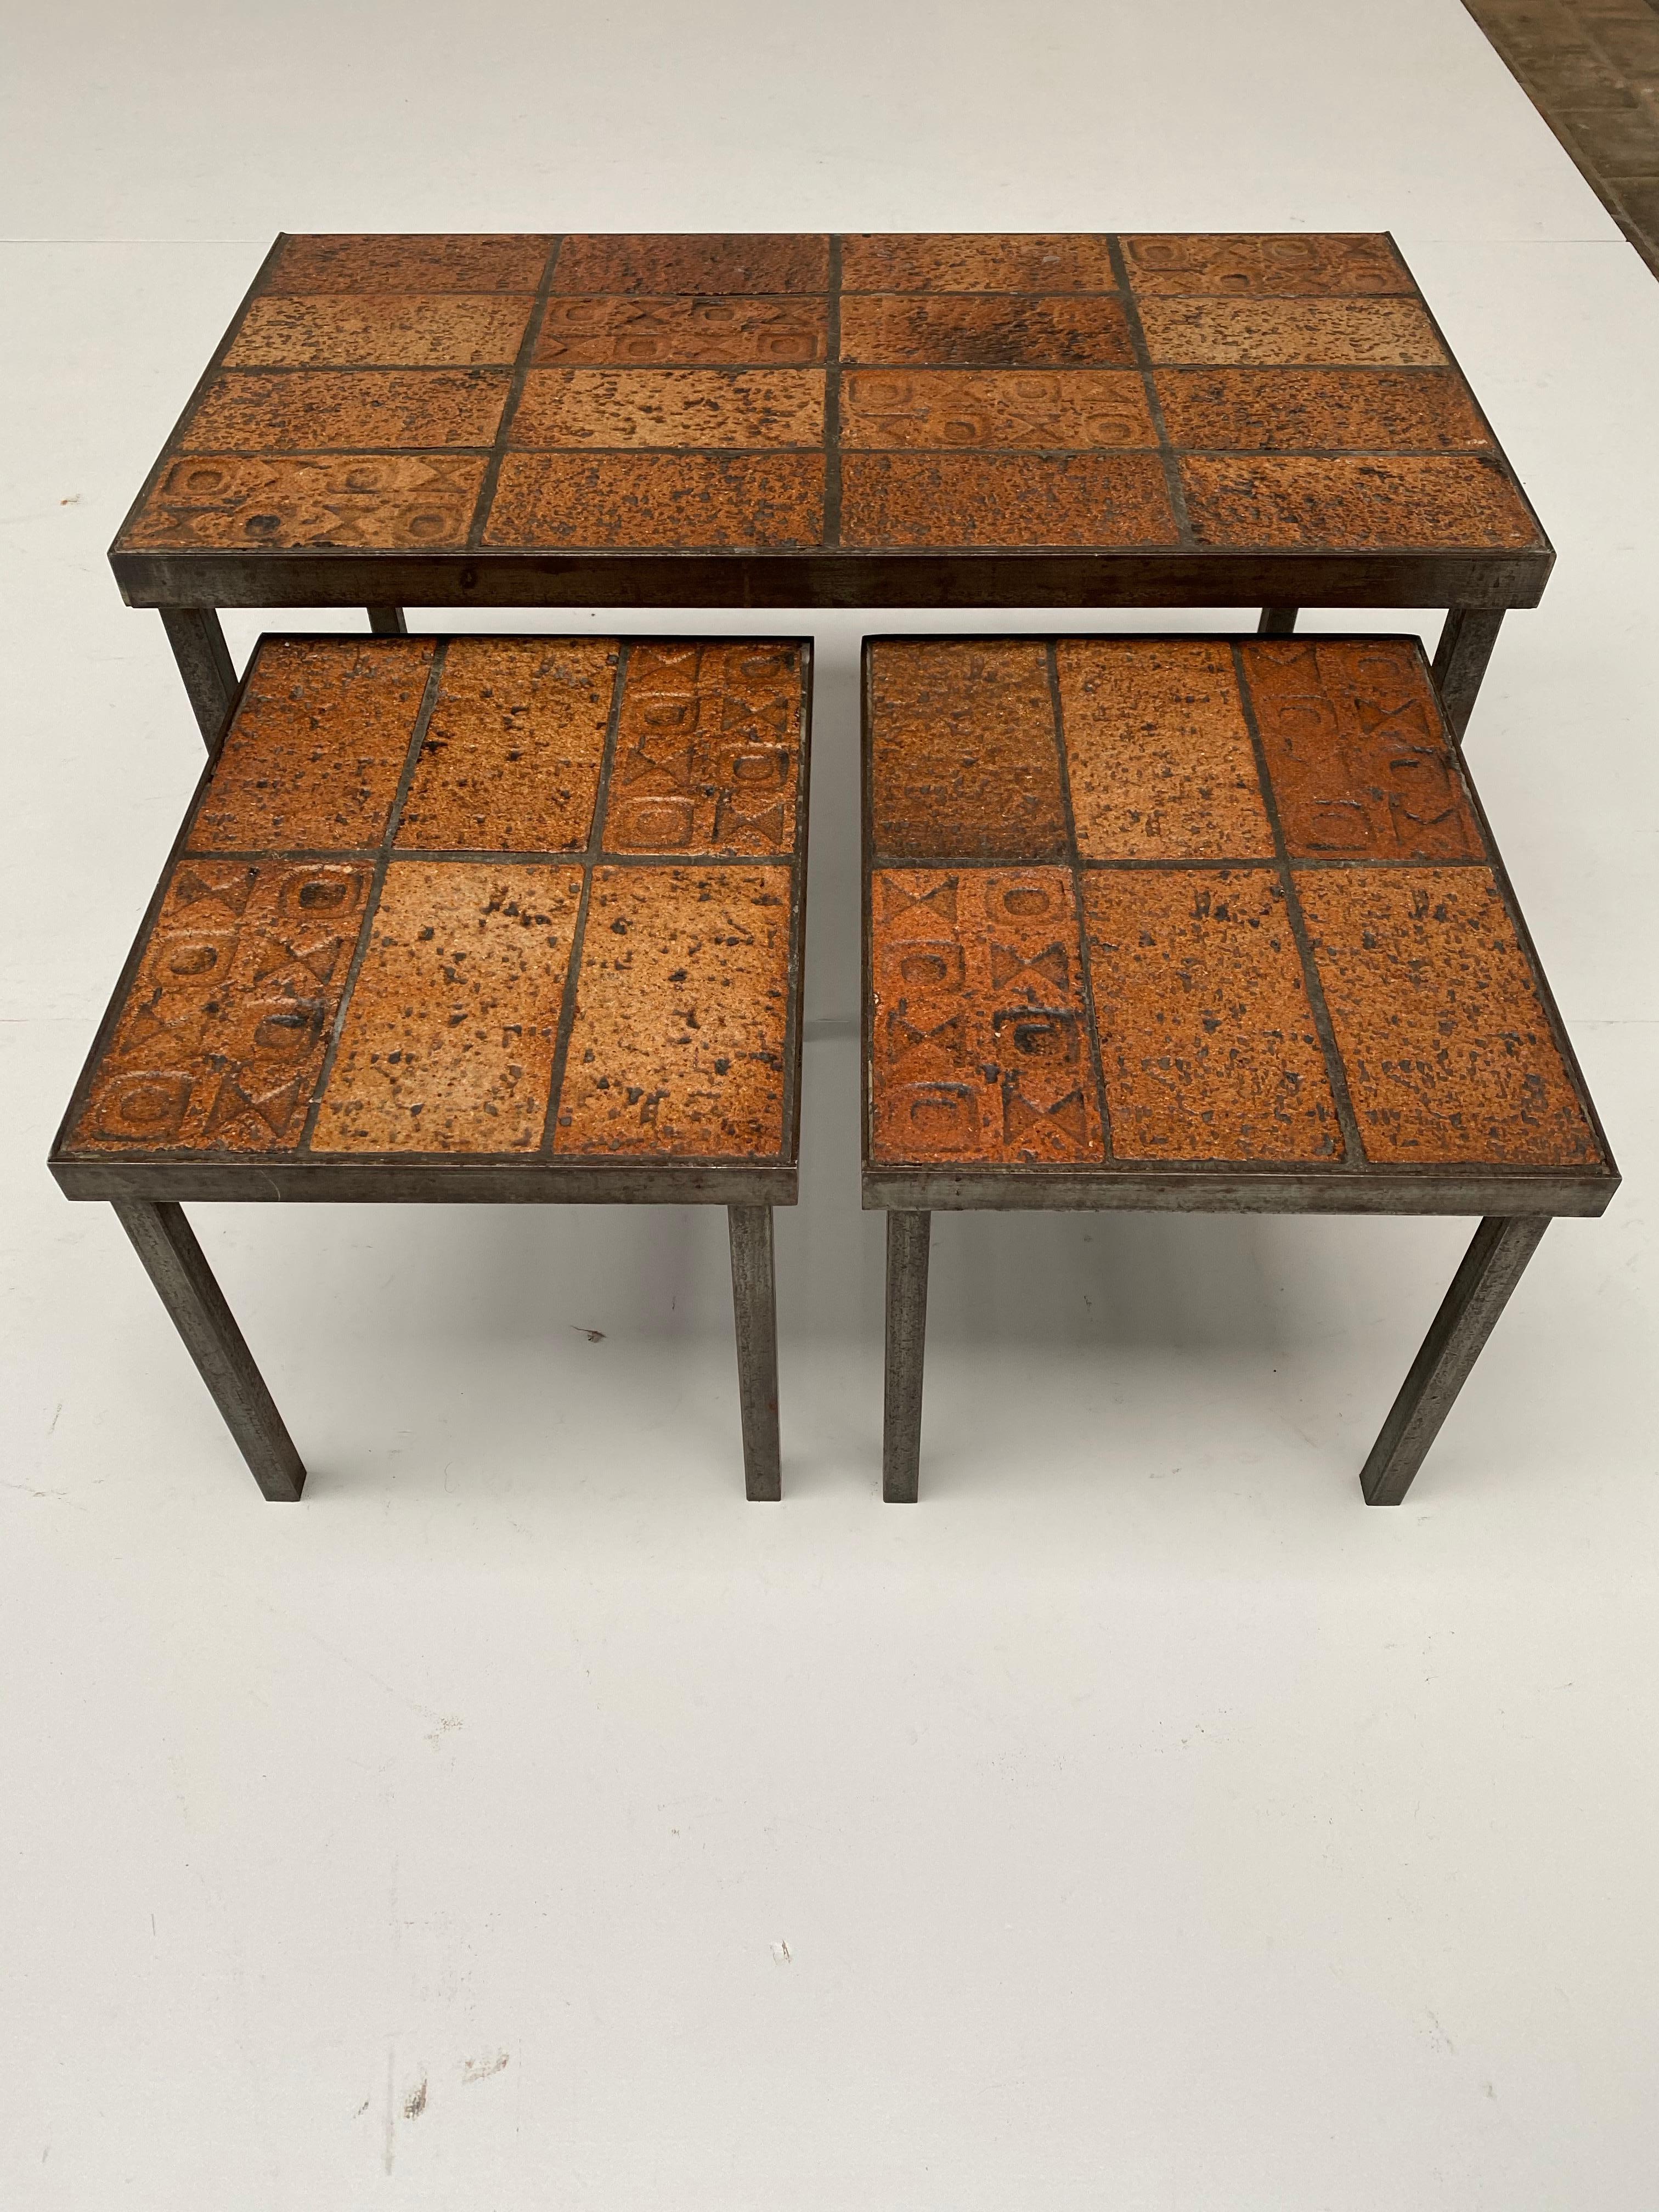 A set of nesting tables in a Brutalist Belgian 1970s style 

The frames are made of solid steel and the tops all have ceramic artwork tiles with geometric symbols imbedded in concrete 

The set is quite heavy and very solid due to the use of all